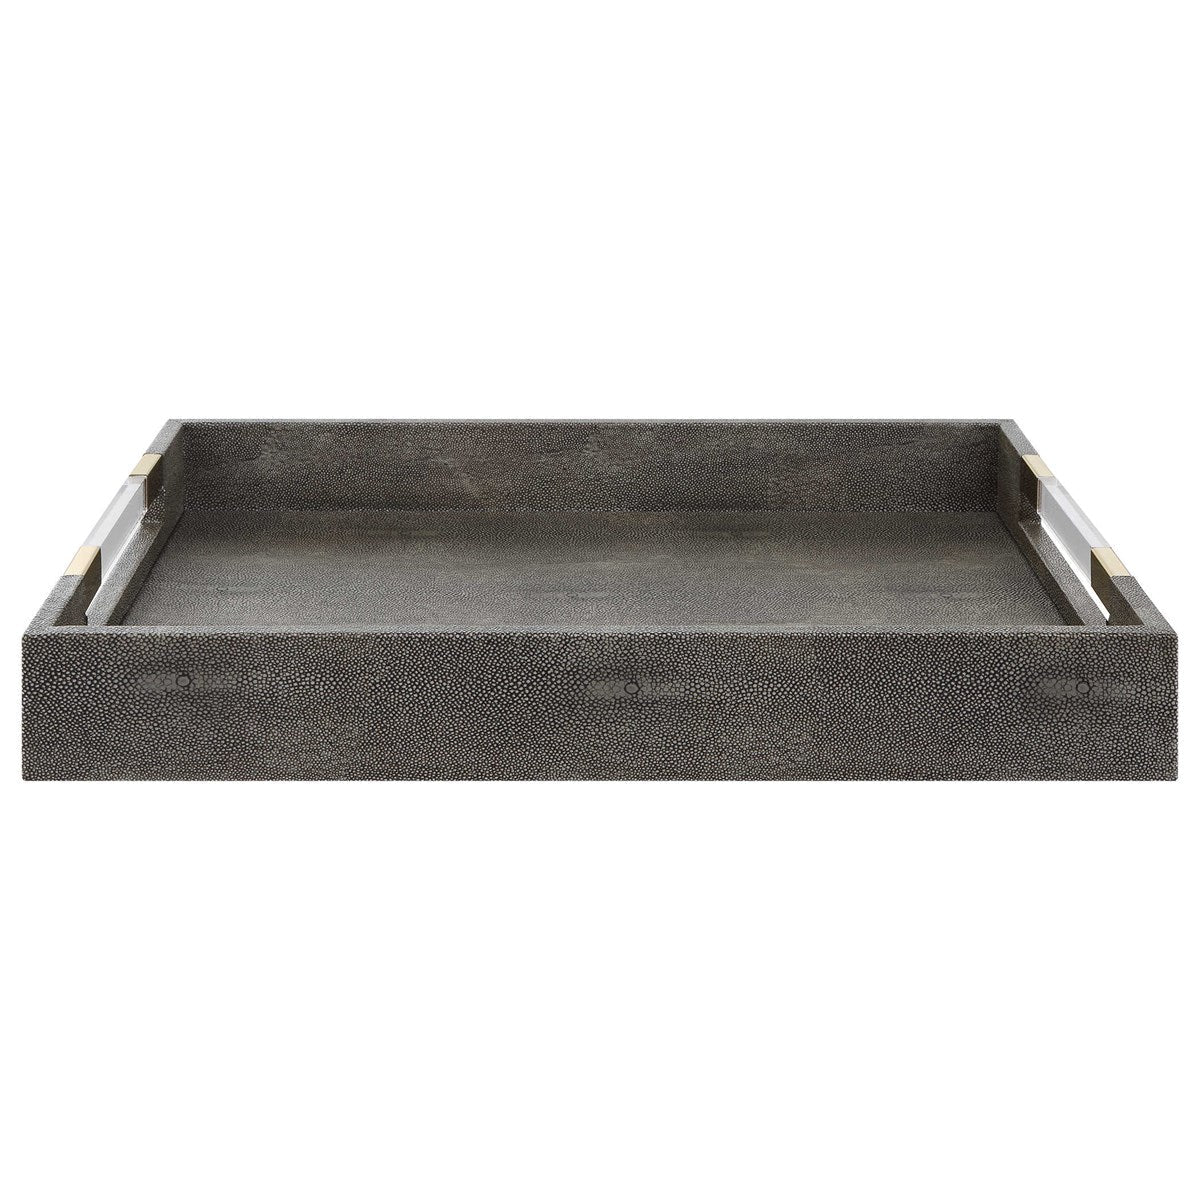 Uttermost Home Decor Uttermost Wessex Tray